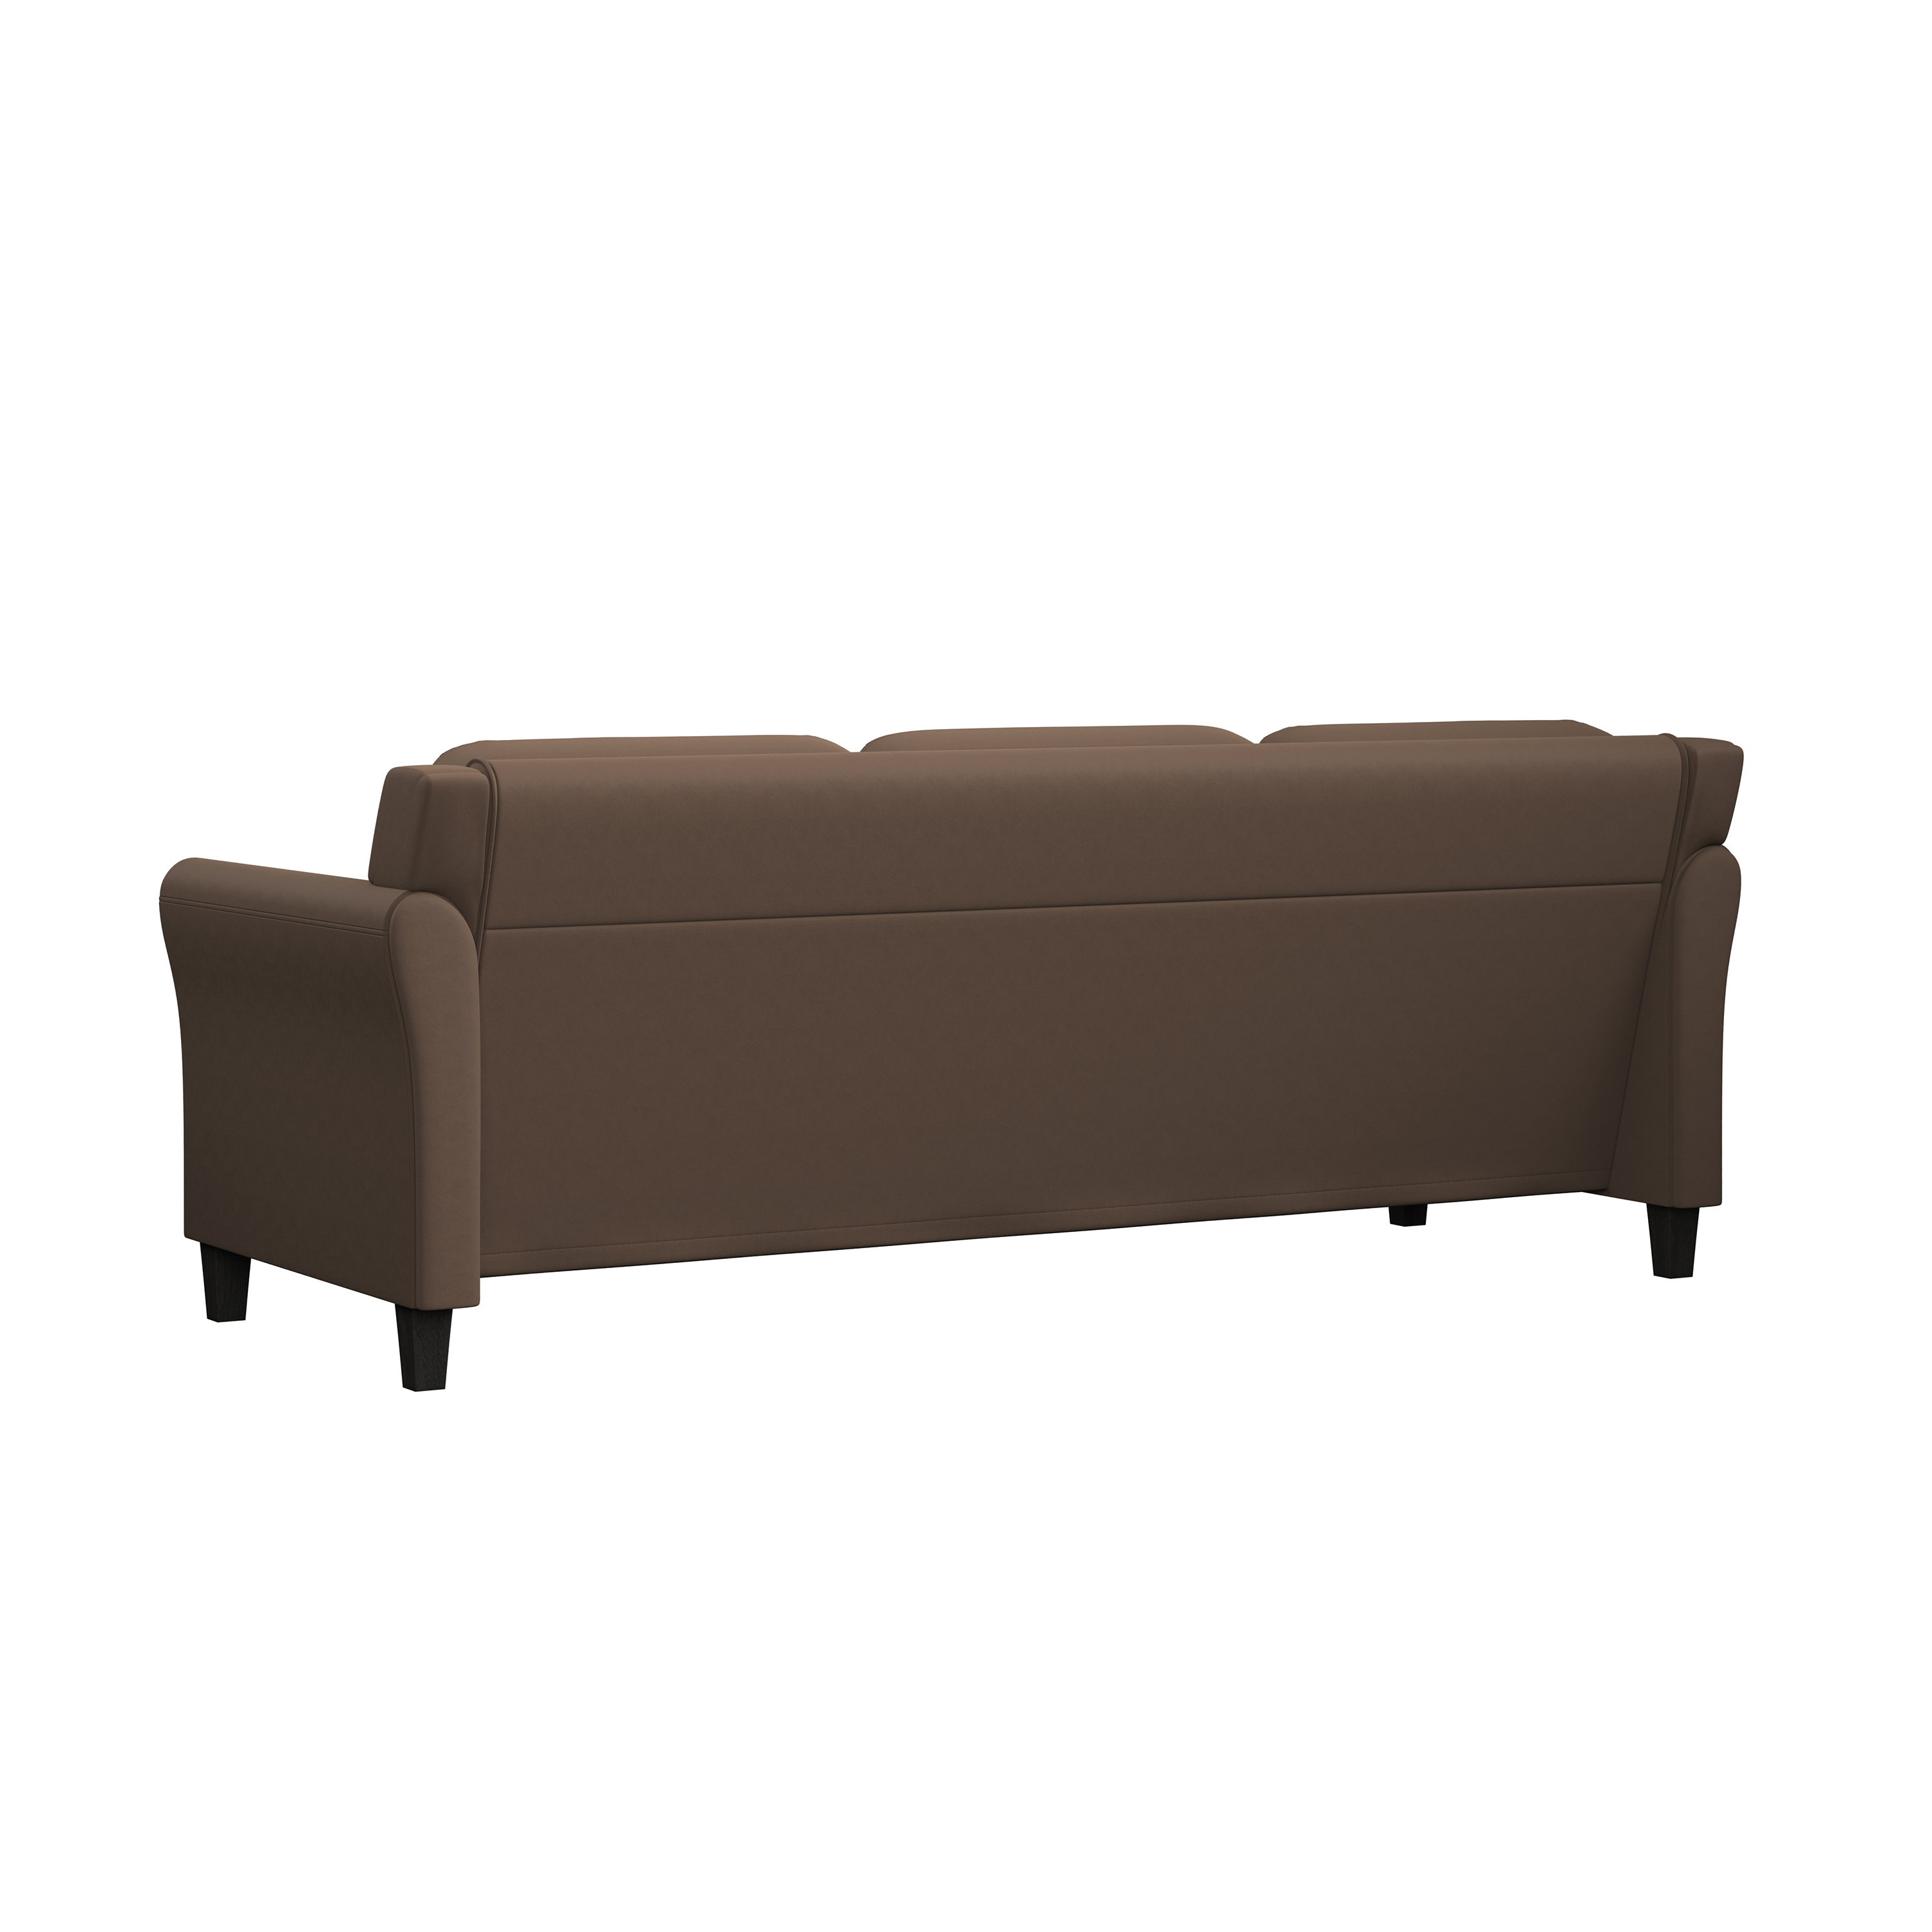 Lifestyle Solutions Taryn Traditional Sofa with Rolled Arms, Brown Fabric - image 5 of 12